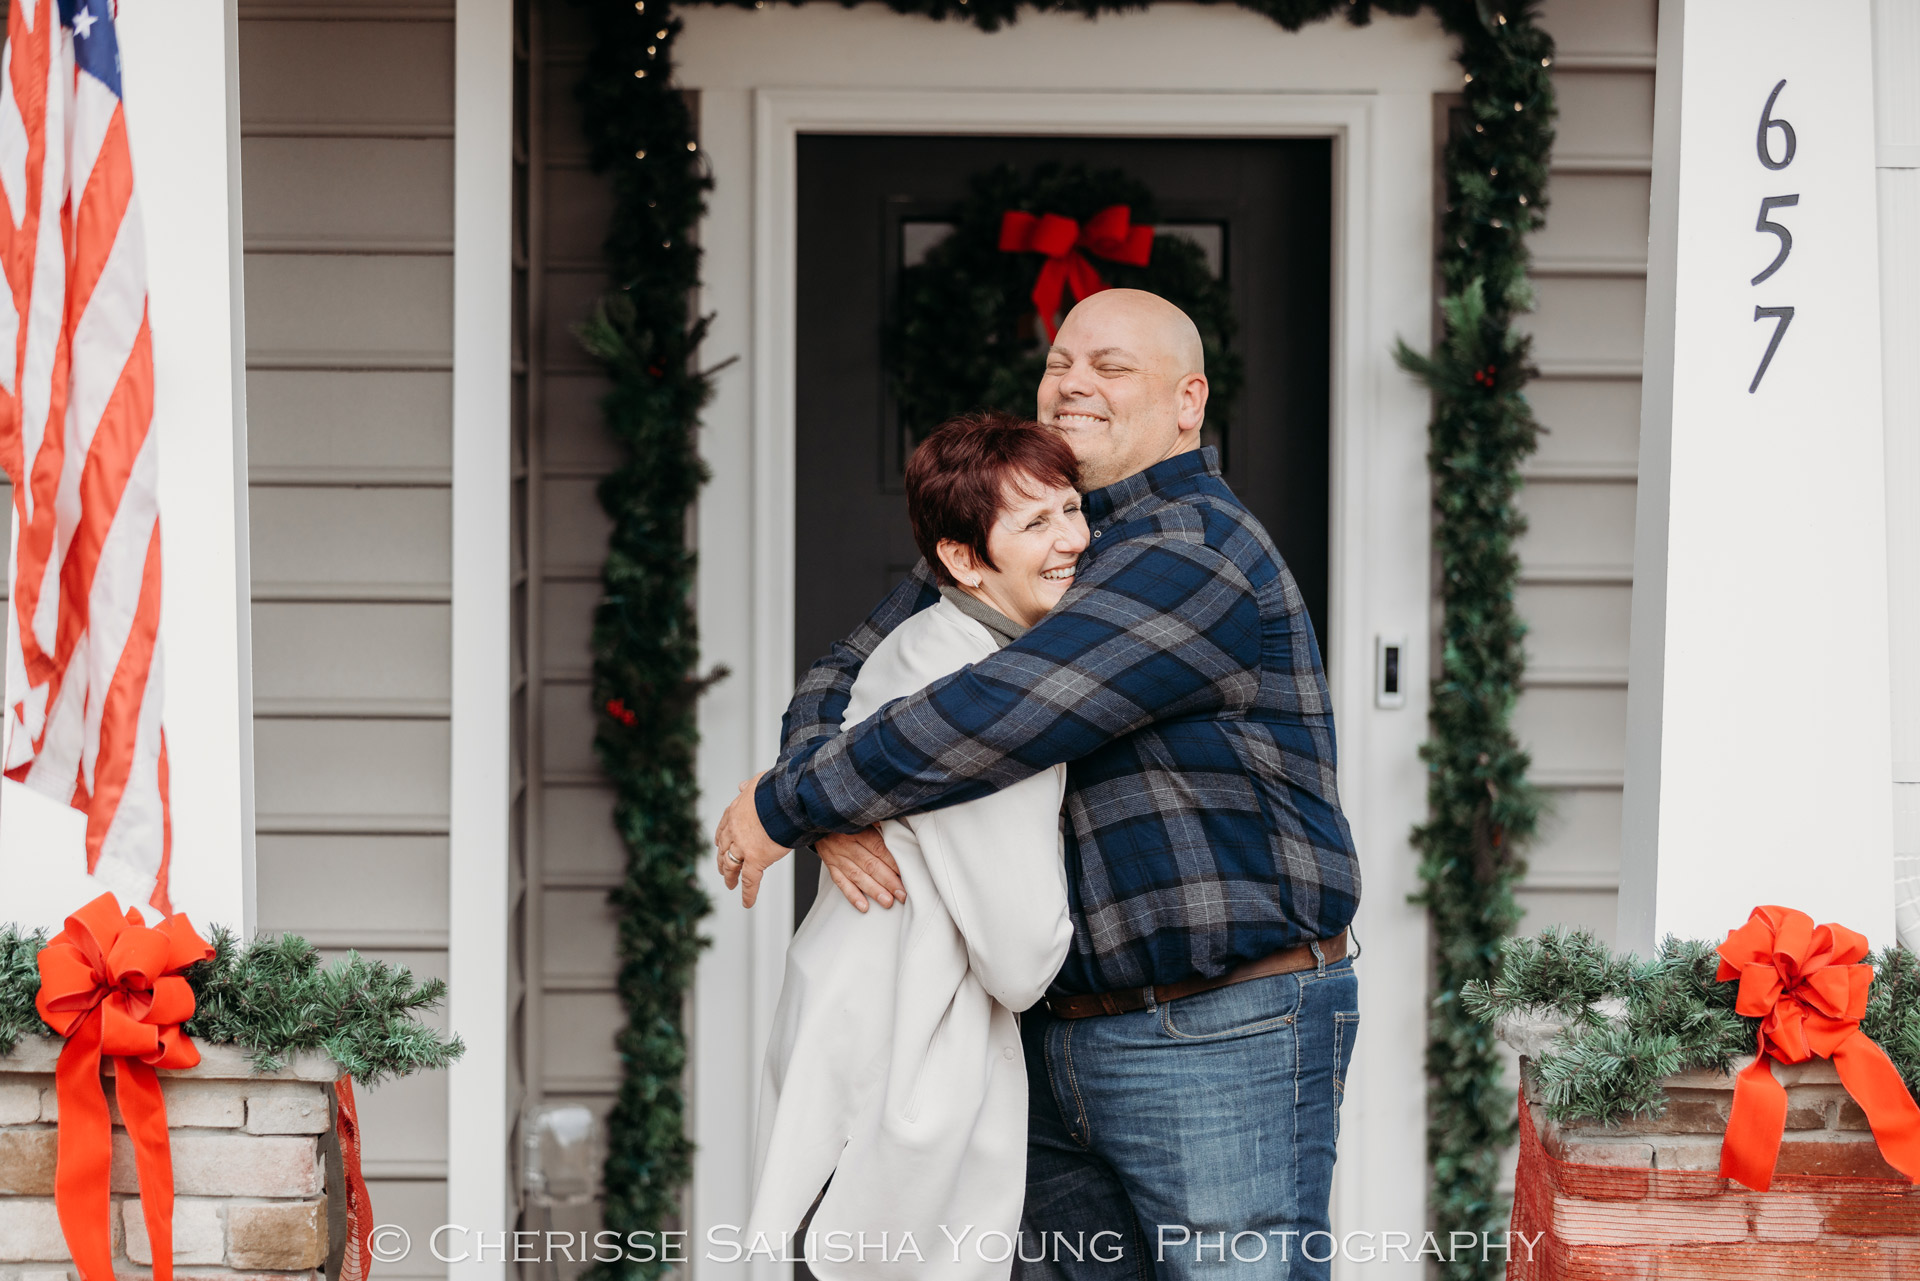 U.S. Army Veteran and Family Received Keys to New Mortgage-Free Lennar Home in Inman, South Carolina